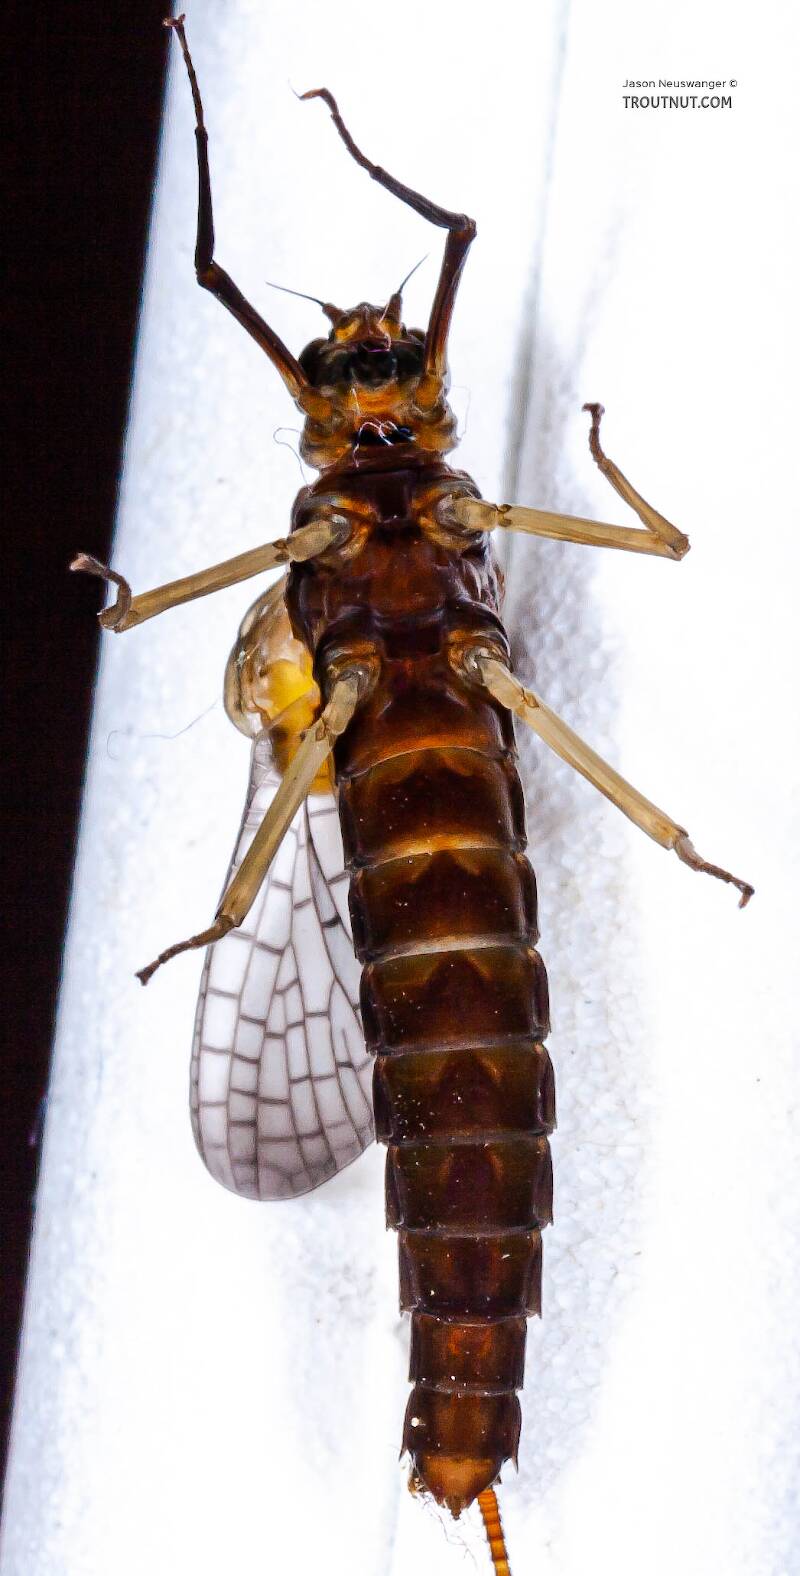 Ventral view of a Female Isonychia bicolor (Isonychiidae) (Mahogany Dun) Mayfly Dun from the West Branch of Owego Creek in New York